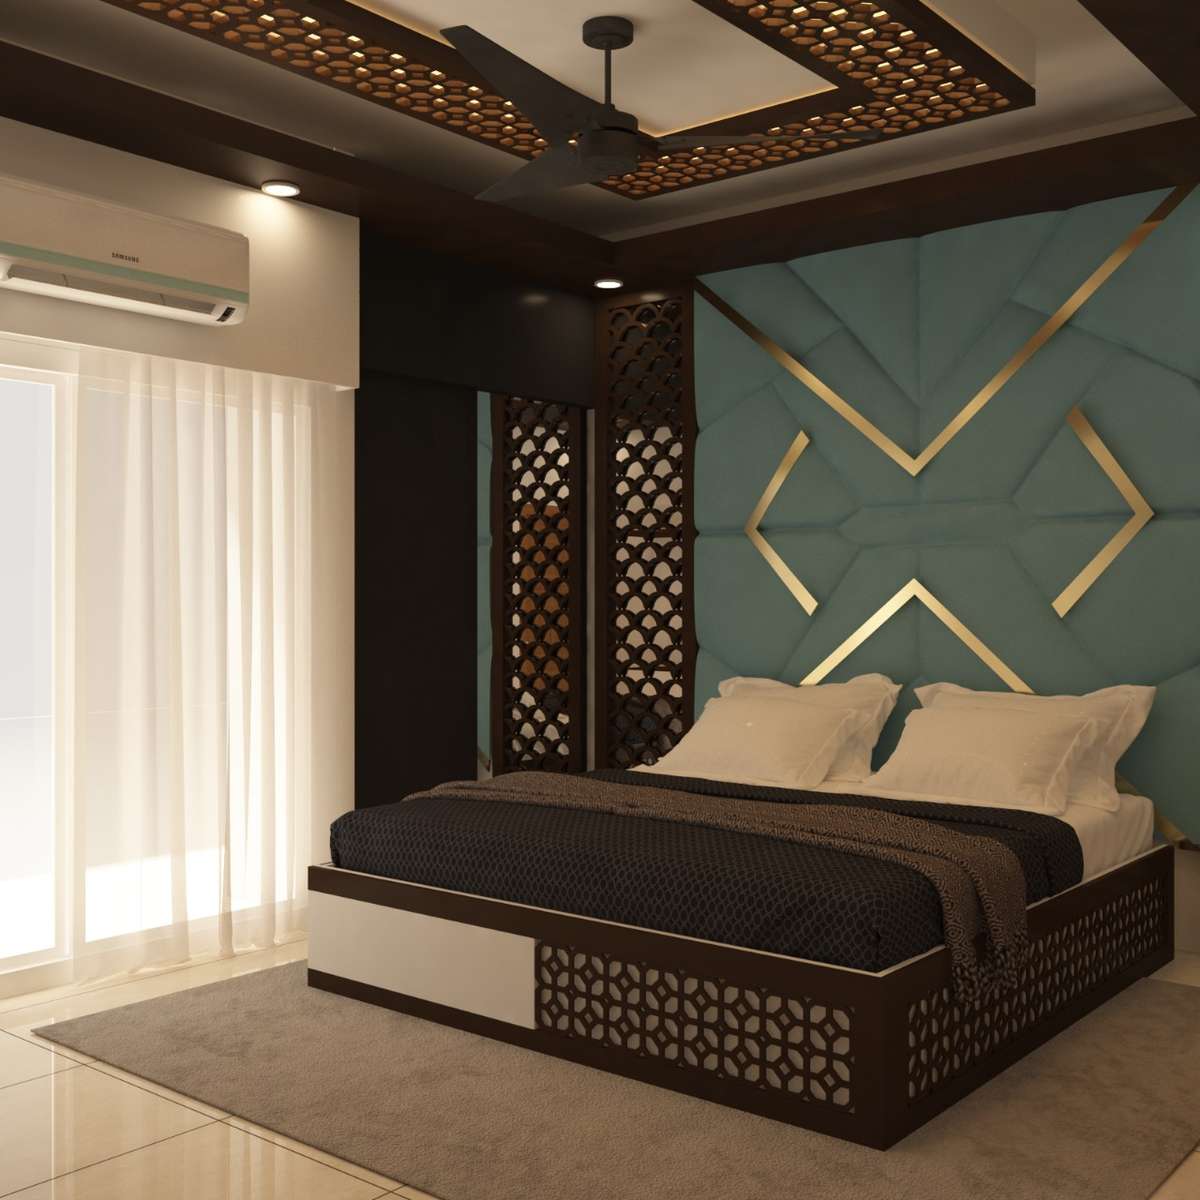 Ceiling, Furniture, Storage, Bedroom, Wall Designs by Interior ...